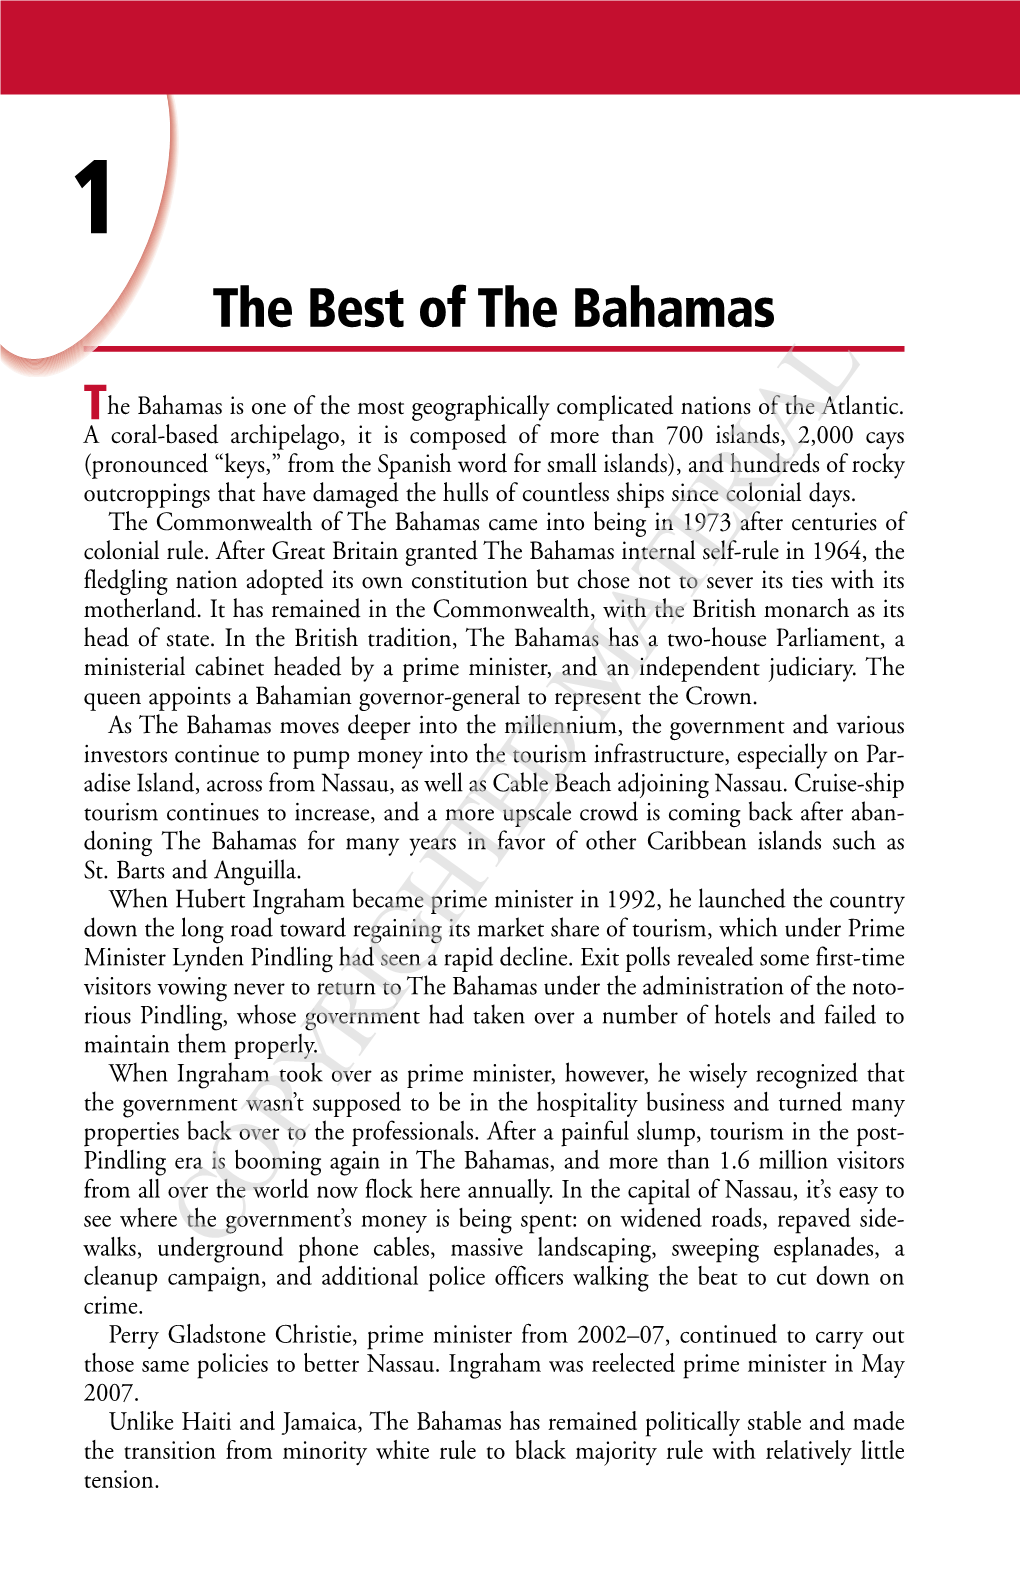 The Best of the Bahamas